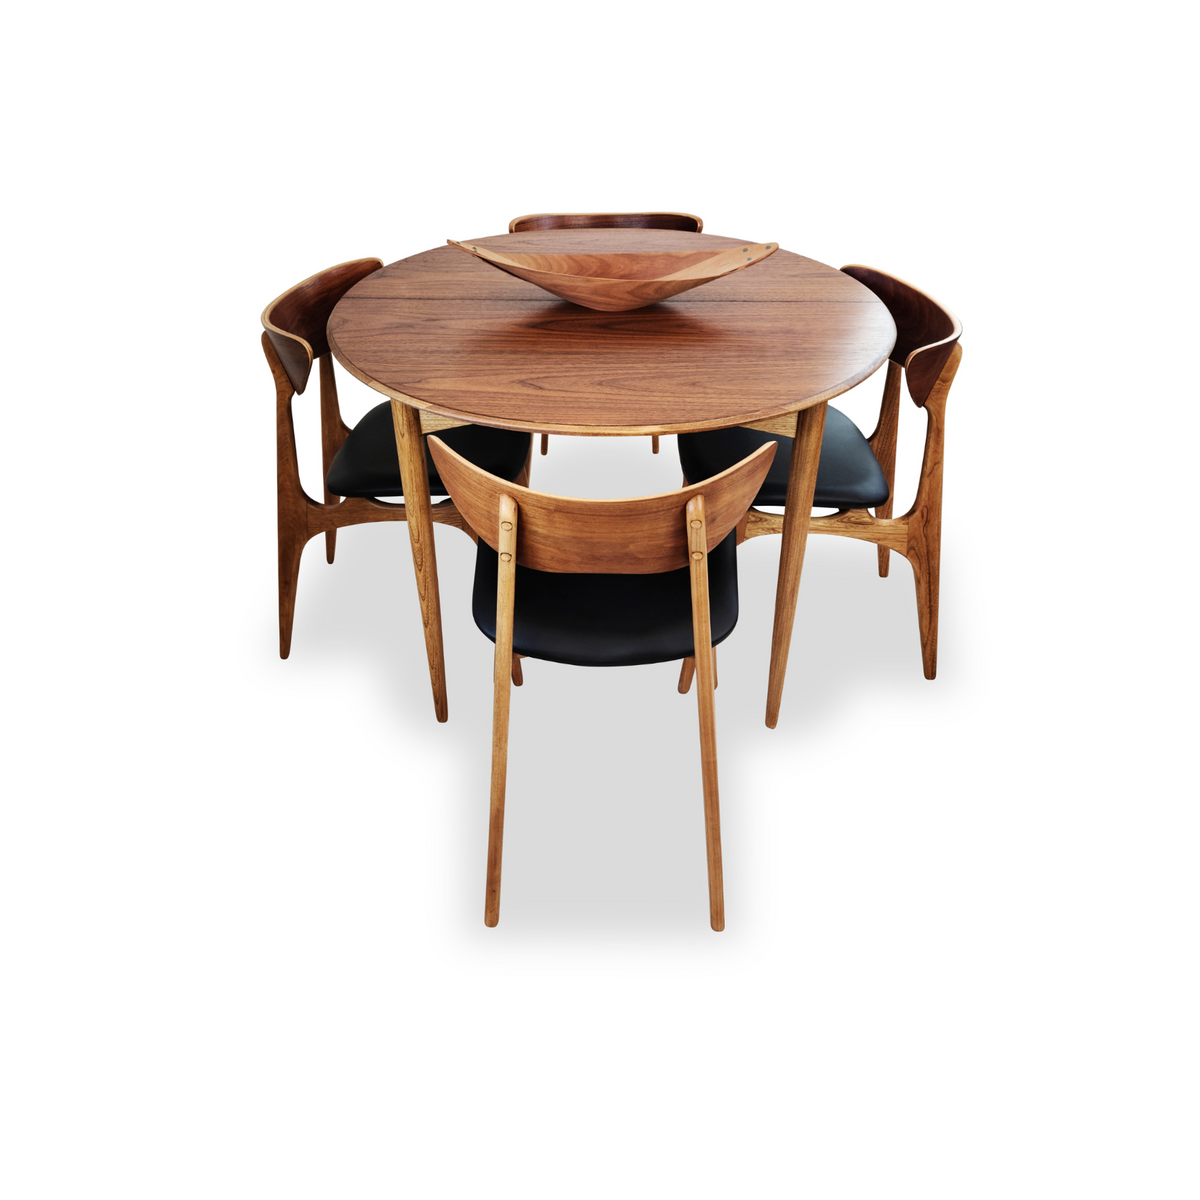 Walnut and Ash Dining Table and chairs by Deilcraft